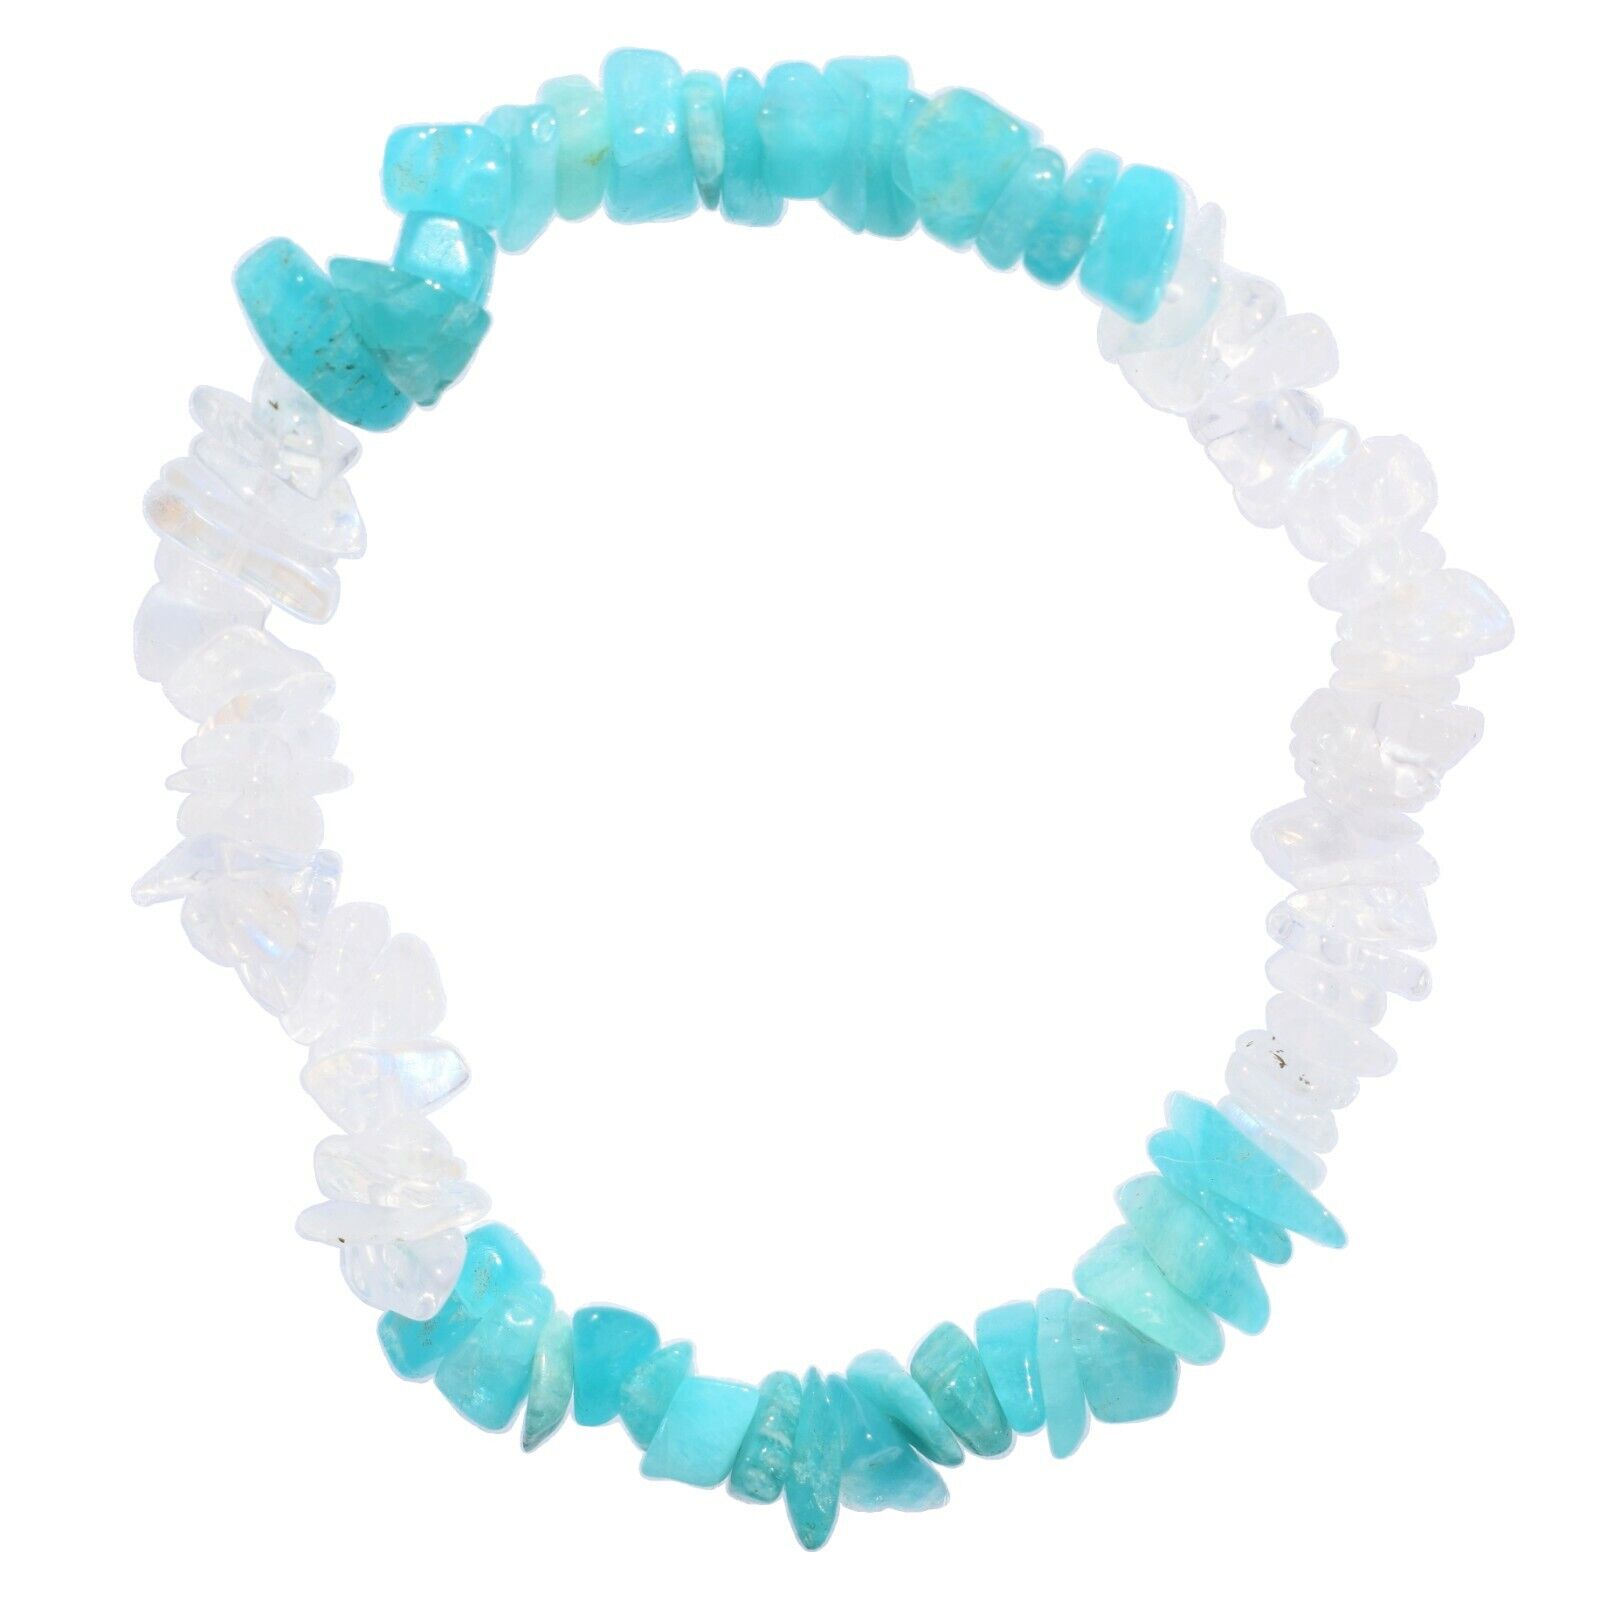 CHARGED Rainbow Moonstone Crystal Chip Combo Stretchy Bracelets - 9 Choices